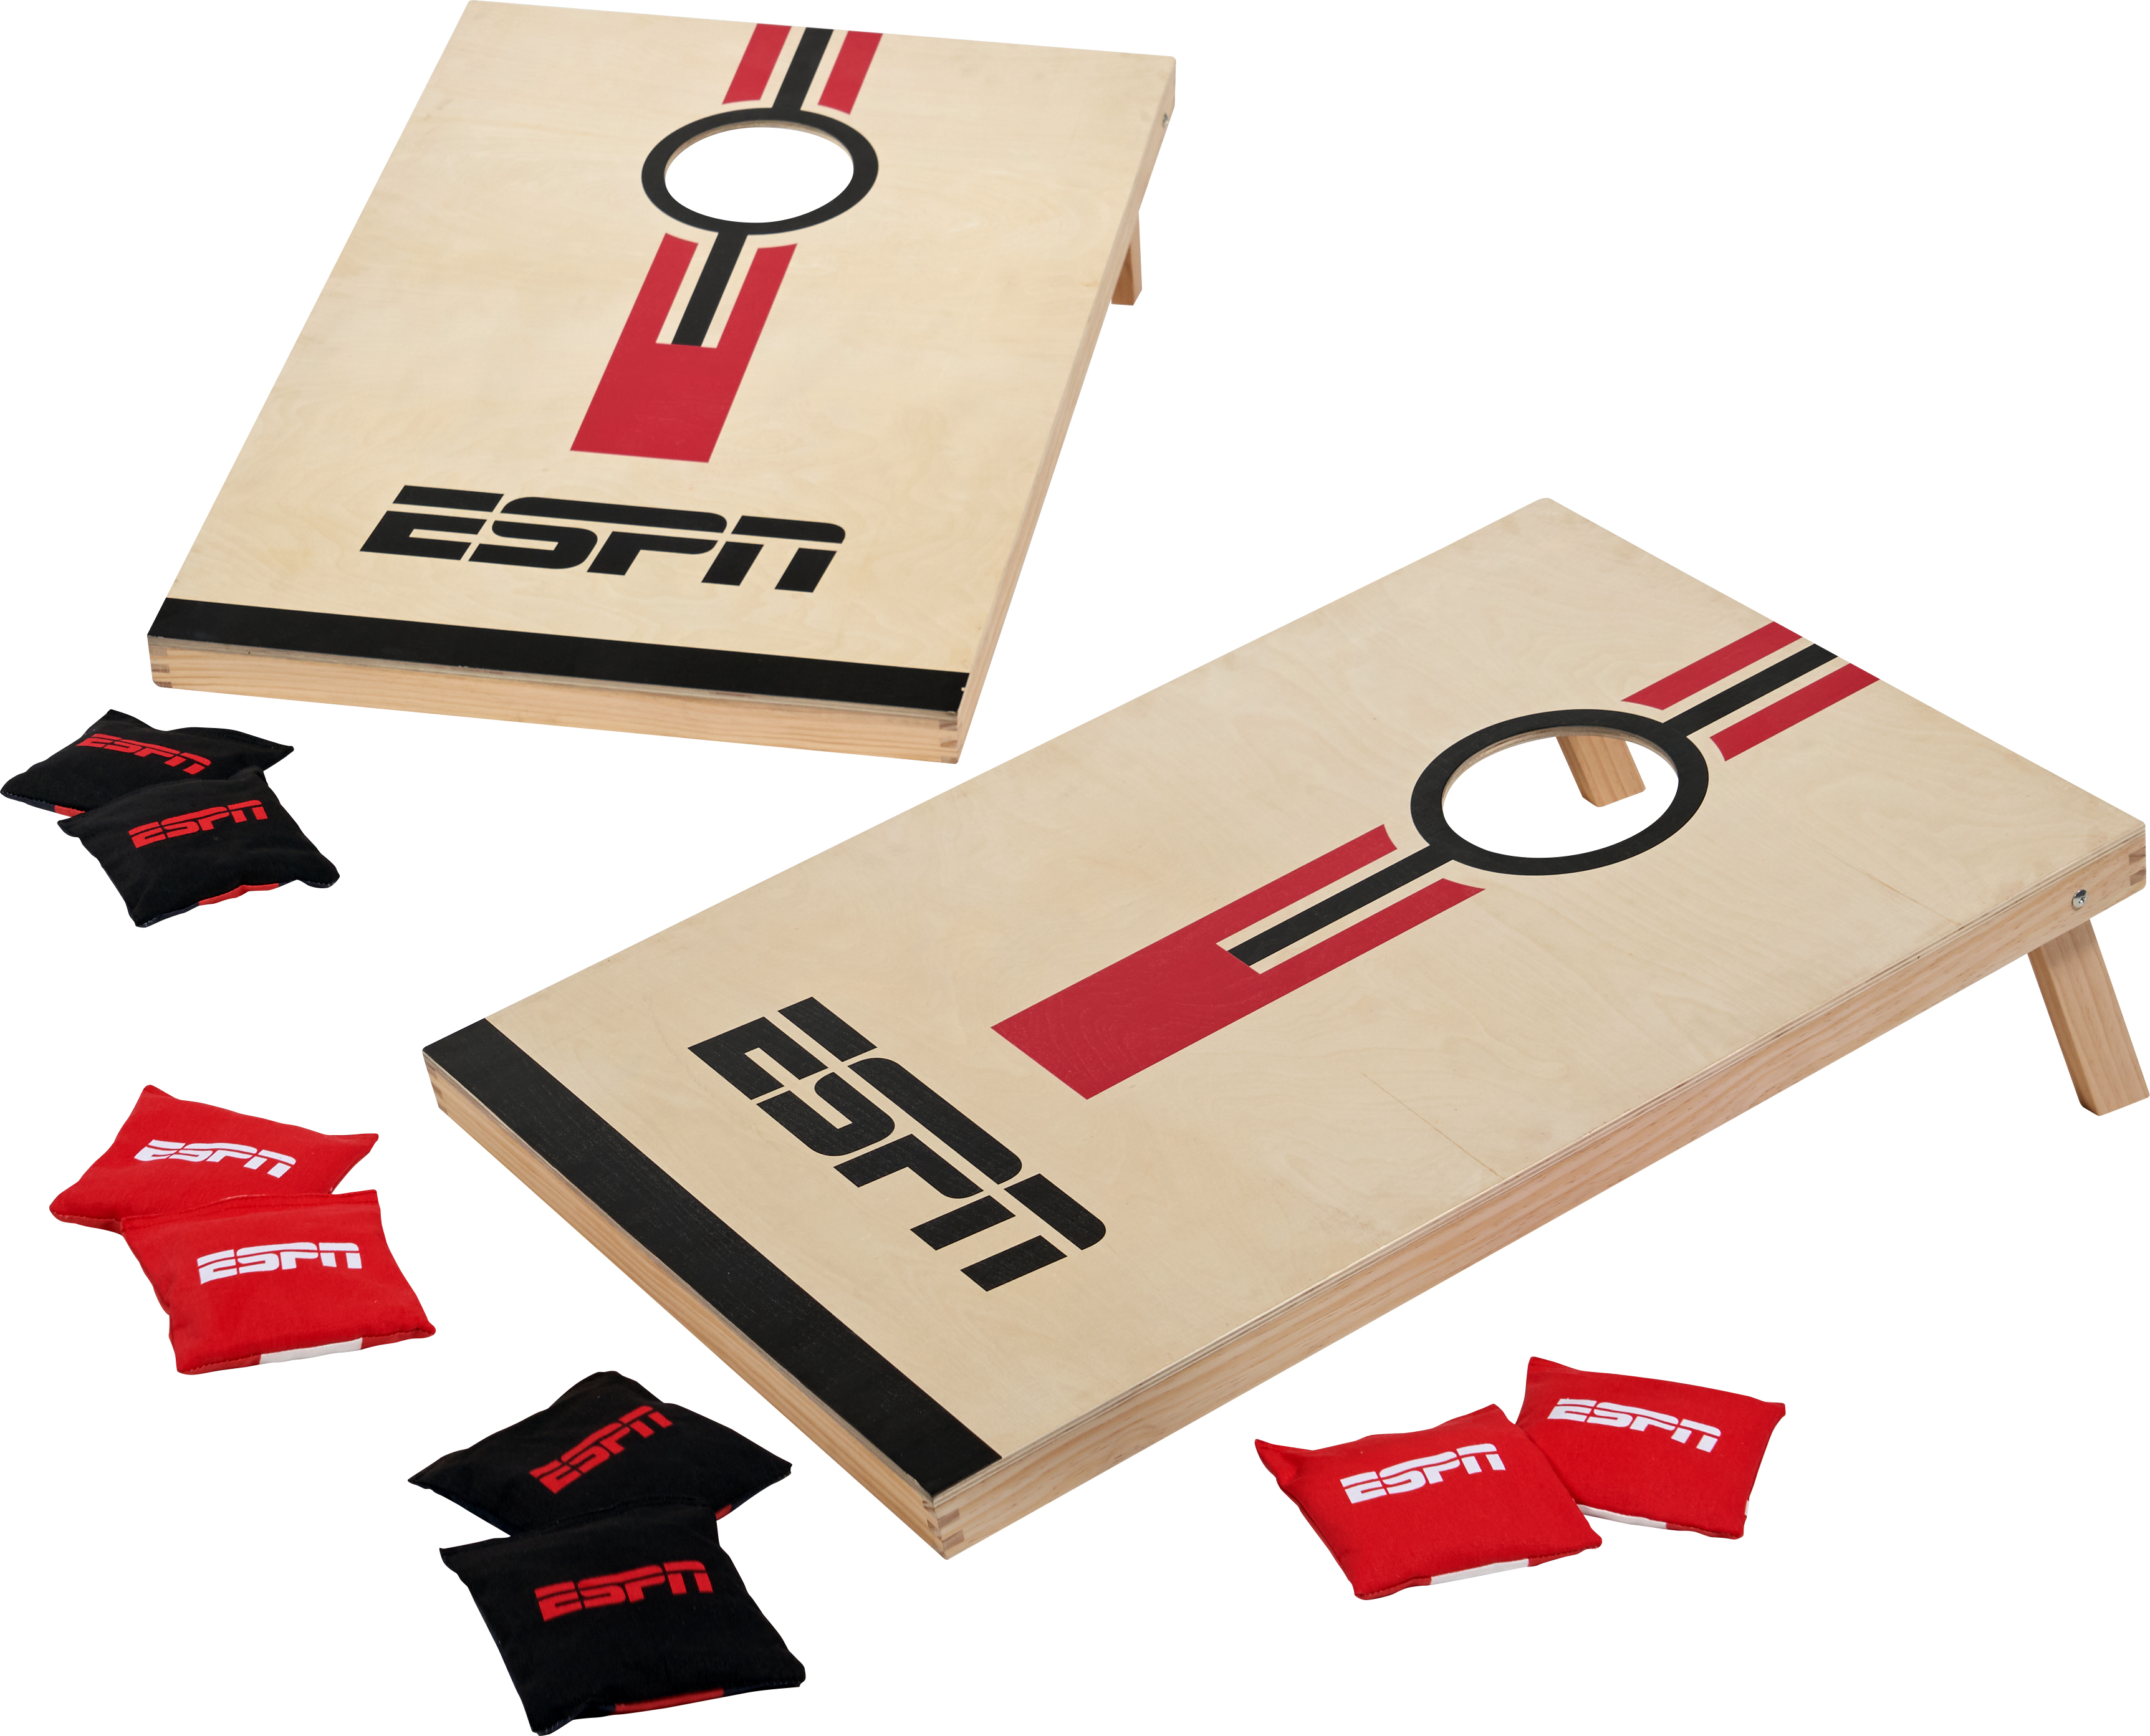 ESPN 36 inch Solid Wood Cornhole Set with All-Weather Bean Bags - Walmart.com $44.74